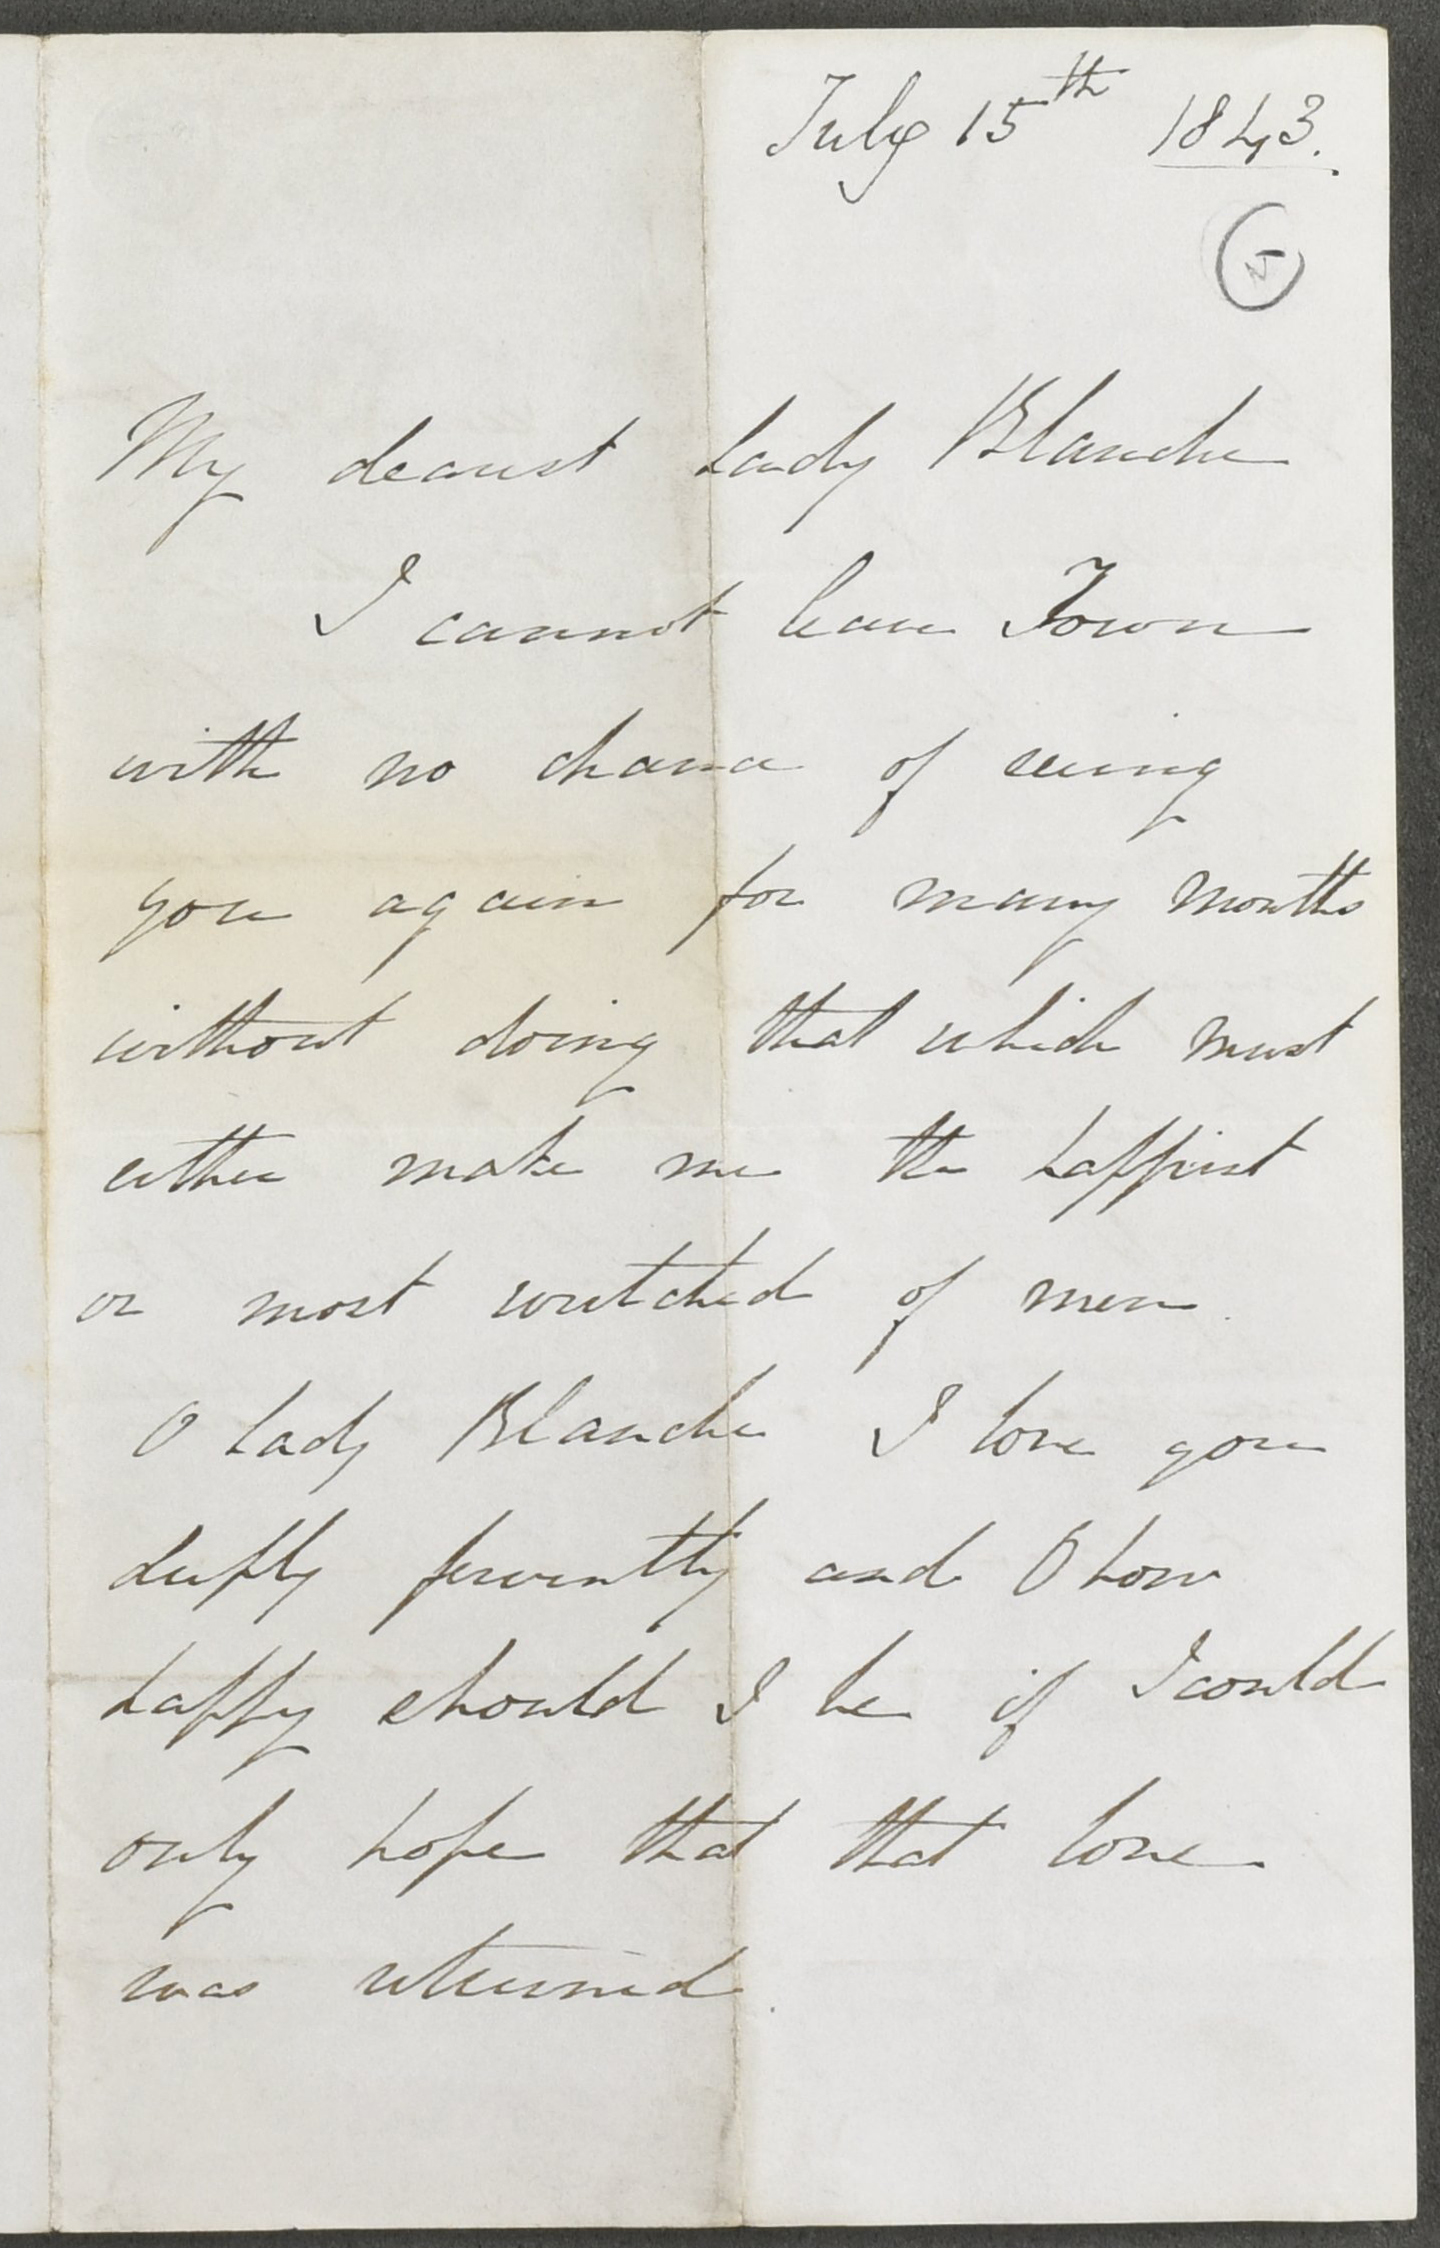 Detail from a letter written to Lady Blanche, 15 July 1843